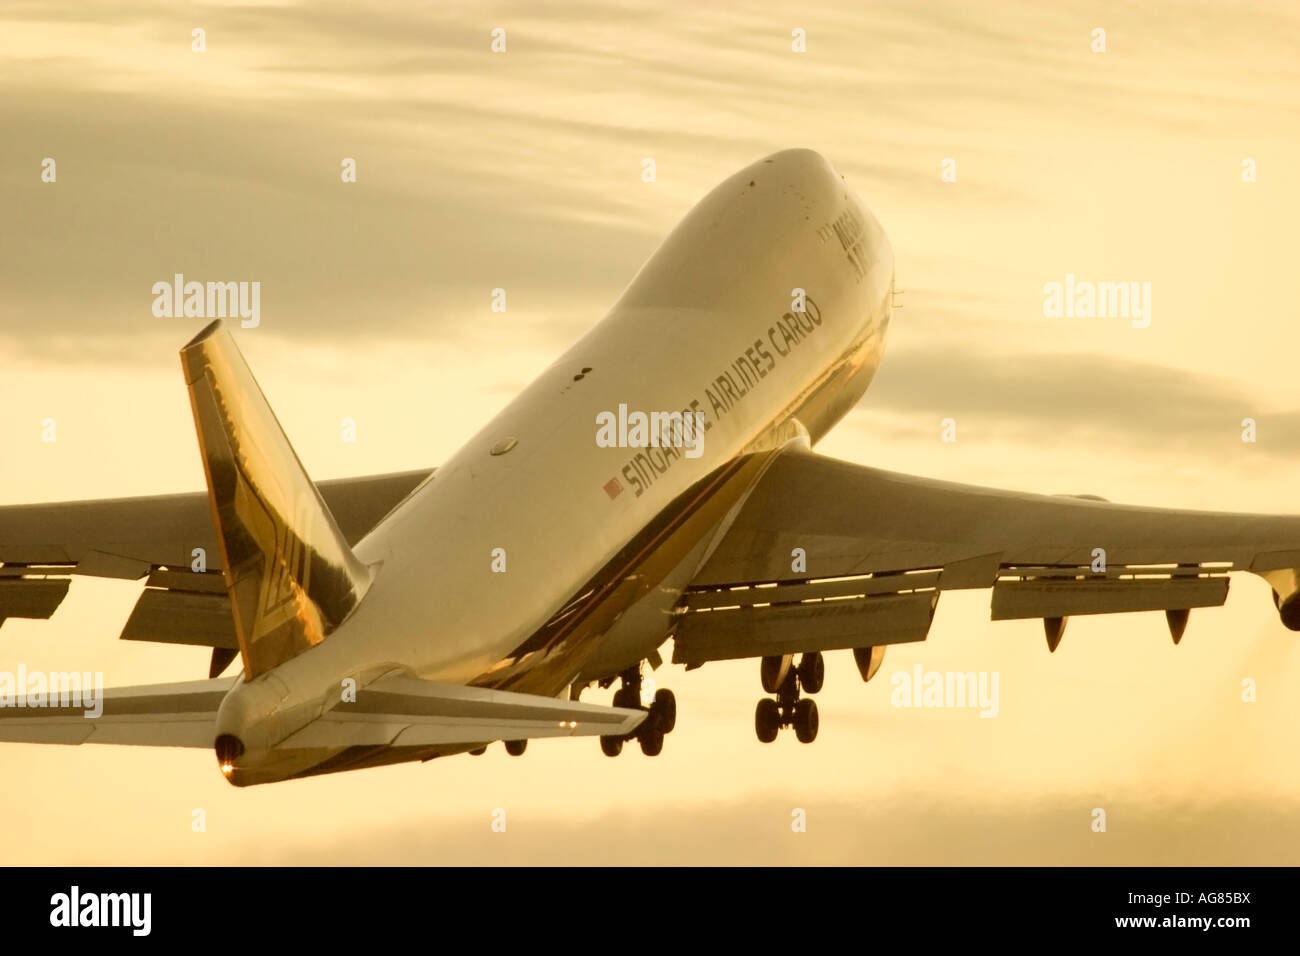 Cargo plane of Singapore Airlines Stock Photo